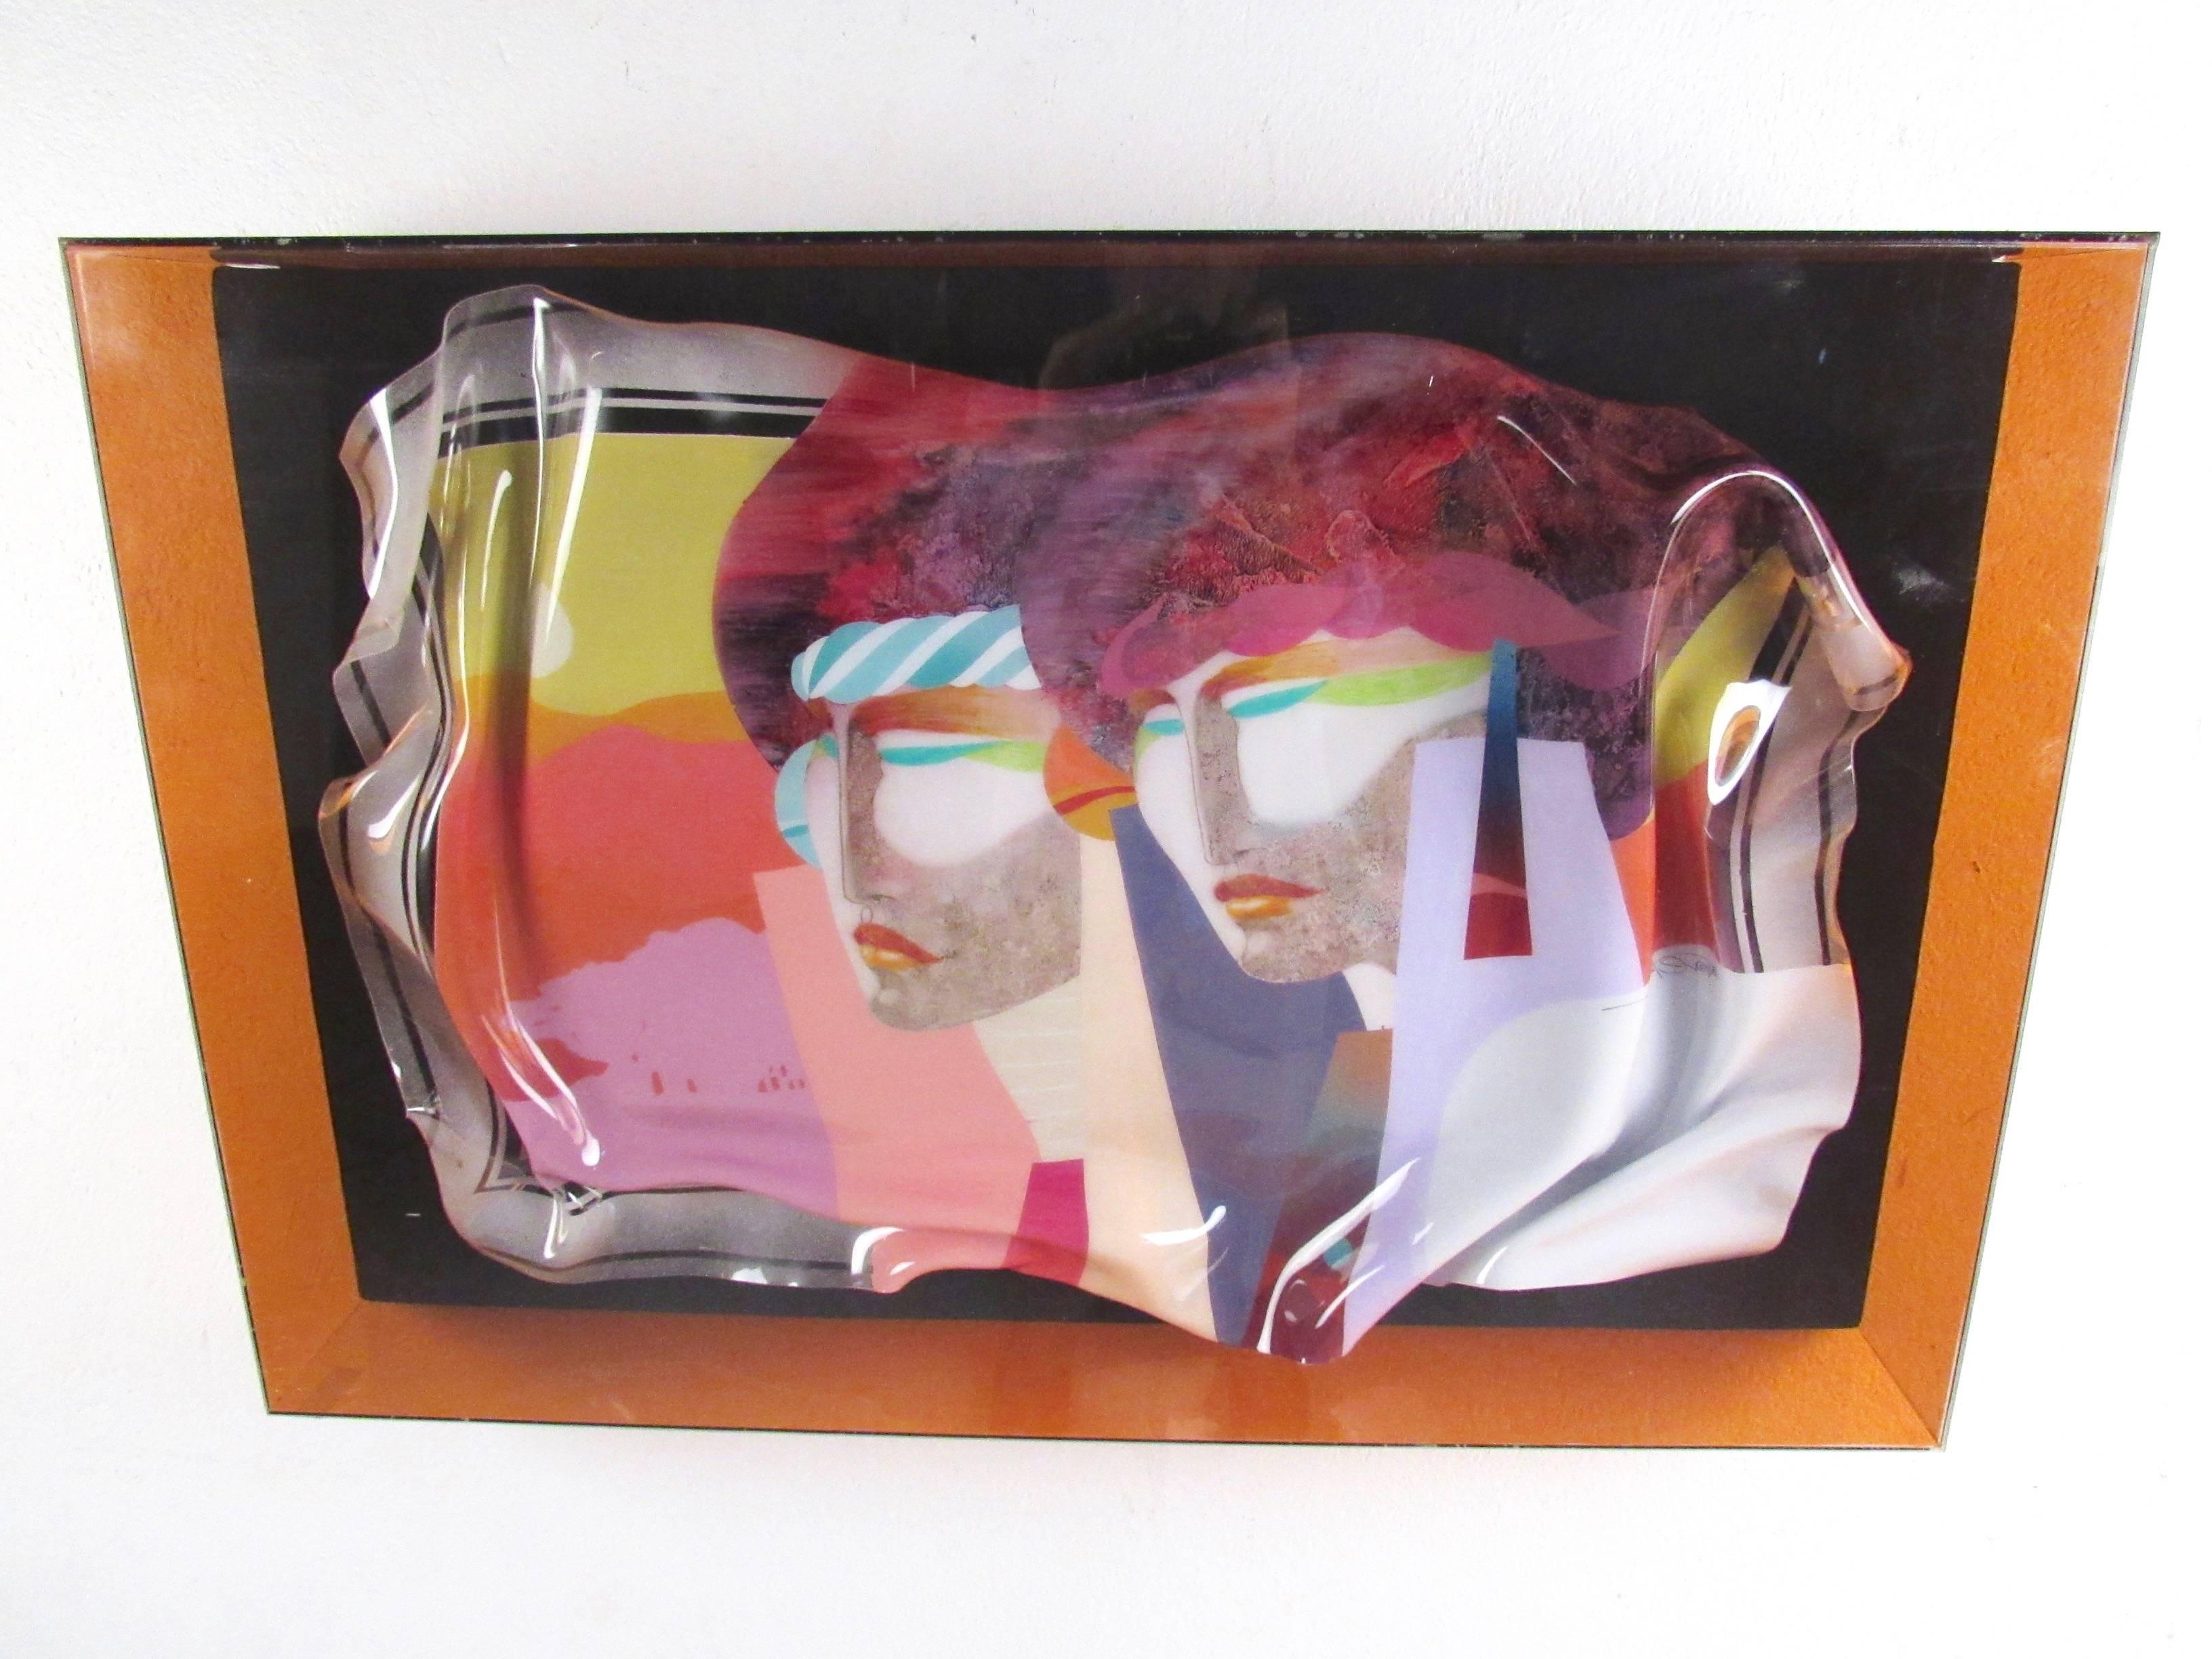 This colorful modern wall art features a vibrant palette, depicting two women and a series of thoughtful abstract designs. The scrolled glass art blends colors and shapes in a truly unique fashion, framed safely in Lucite shadowbox. The originality